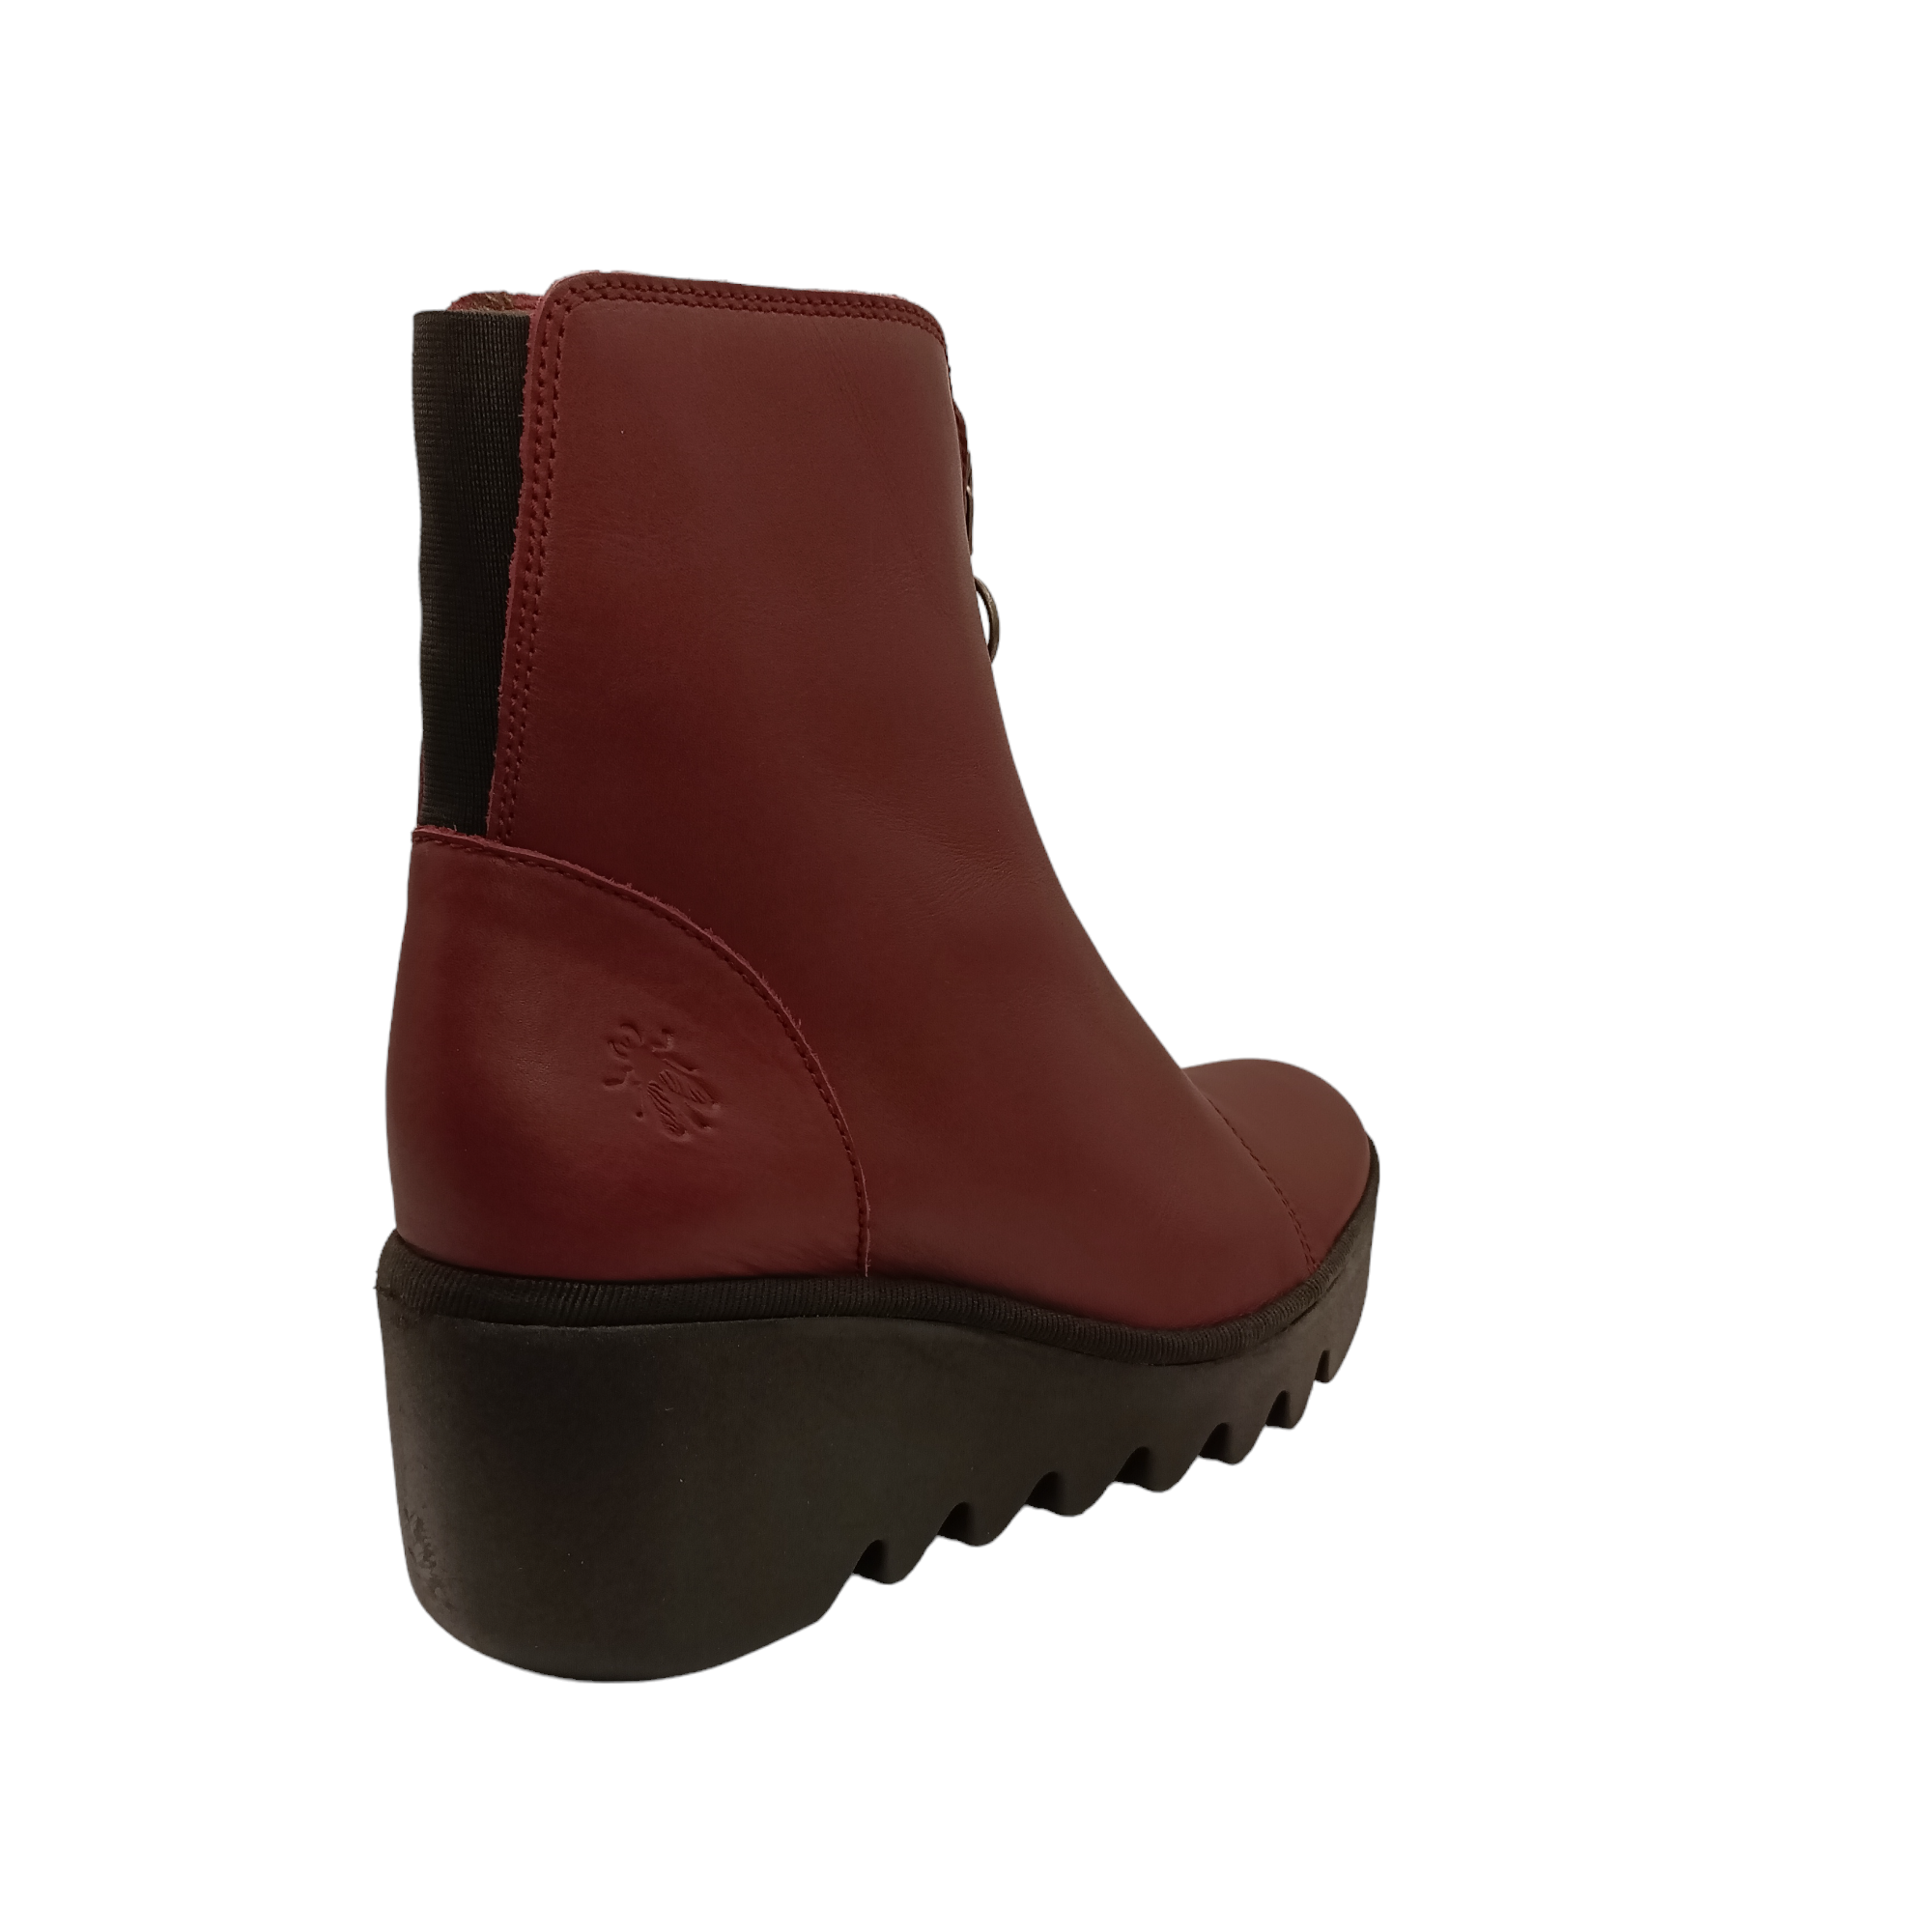 Shop Boce Fly London - with shoe&amp;me - from Fly London - Boots - Boot, Winter, Womens - [collection]